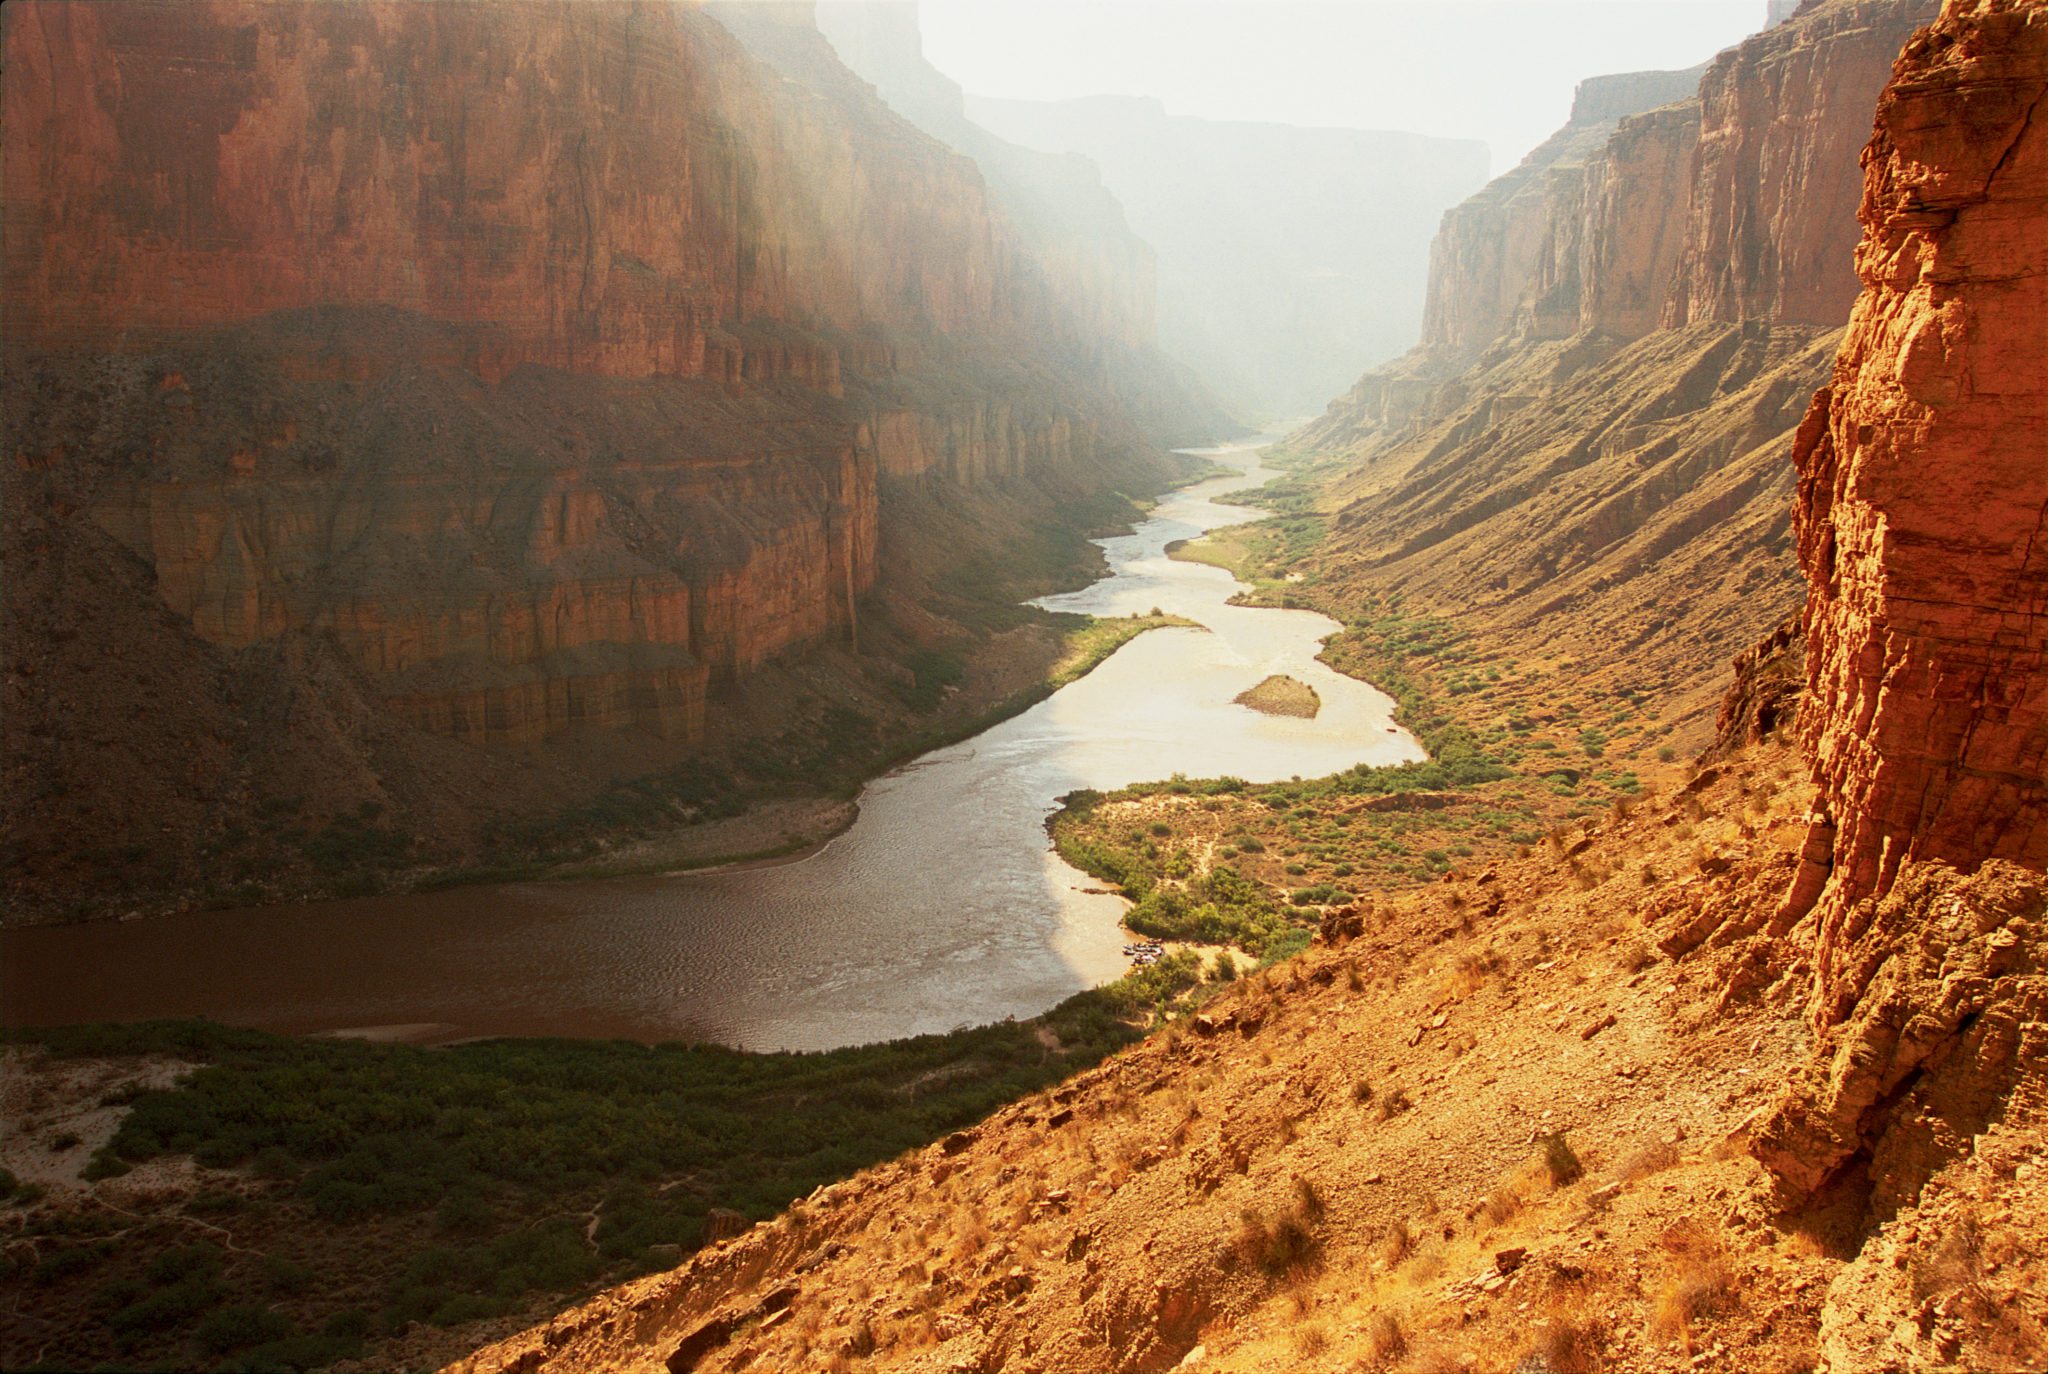 Grand Canyon National Park The Colorado River carves out the Grand Canyon in Arizona. Courtesy of MacGillivray Freeman Films. Photographer: Barbara MacGillivray ©VisitTheUSA.com 